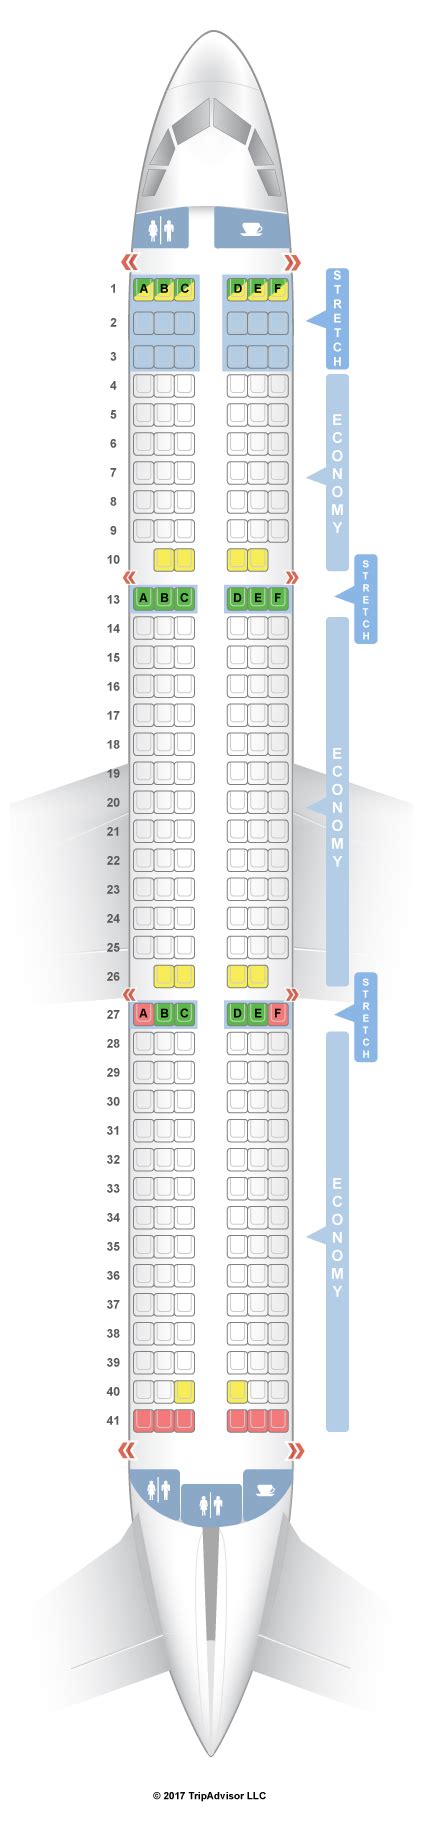 Citilink A320 Seat Map